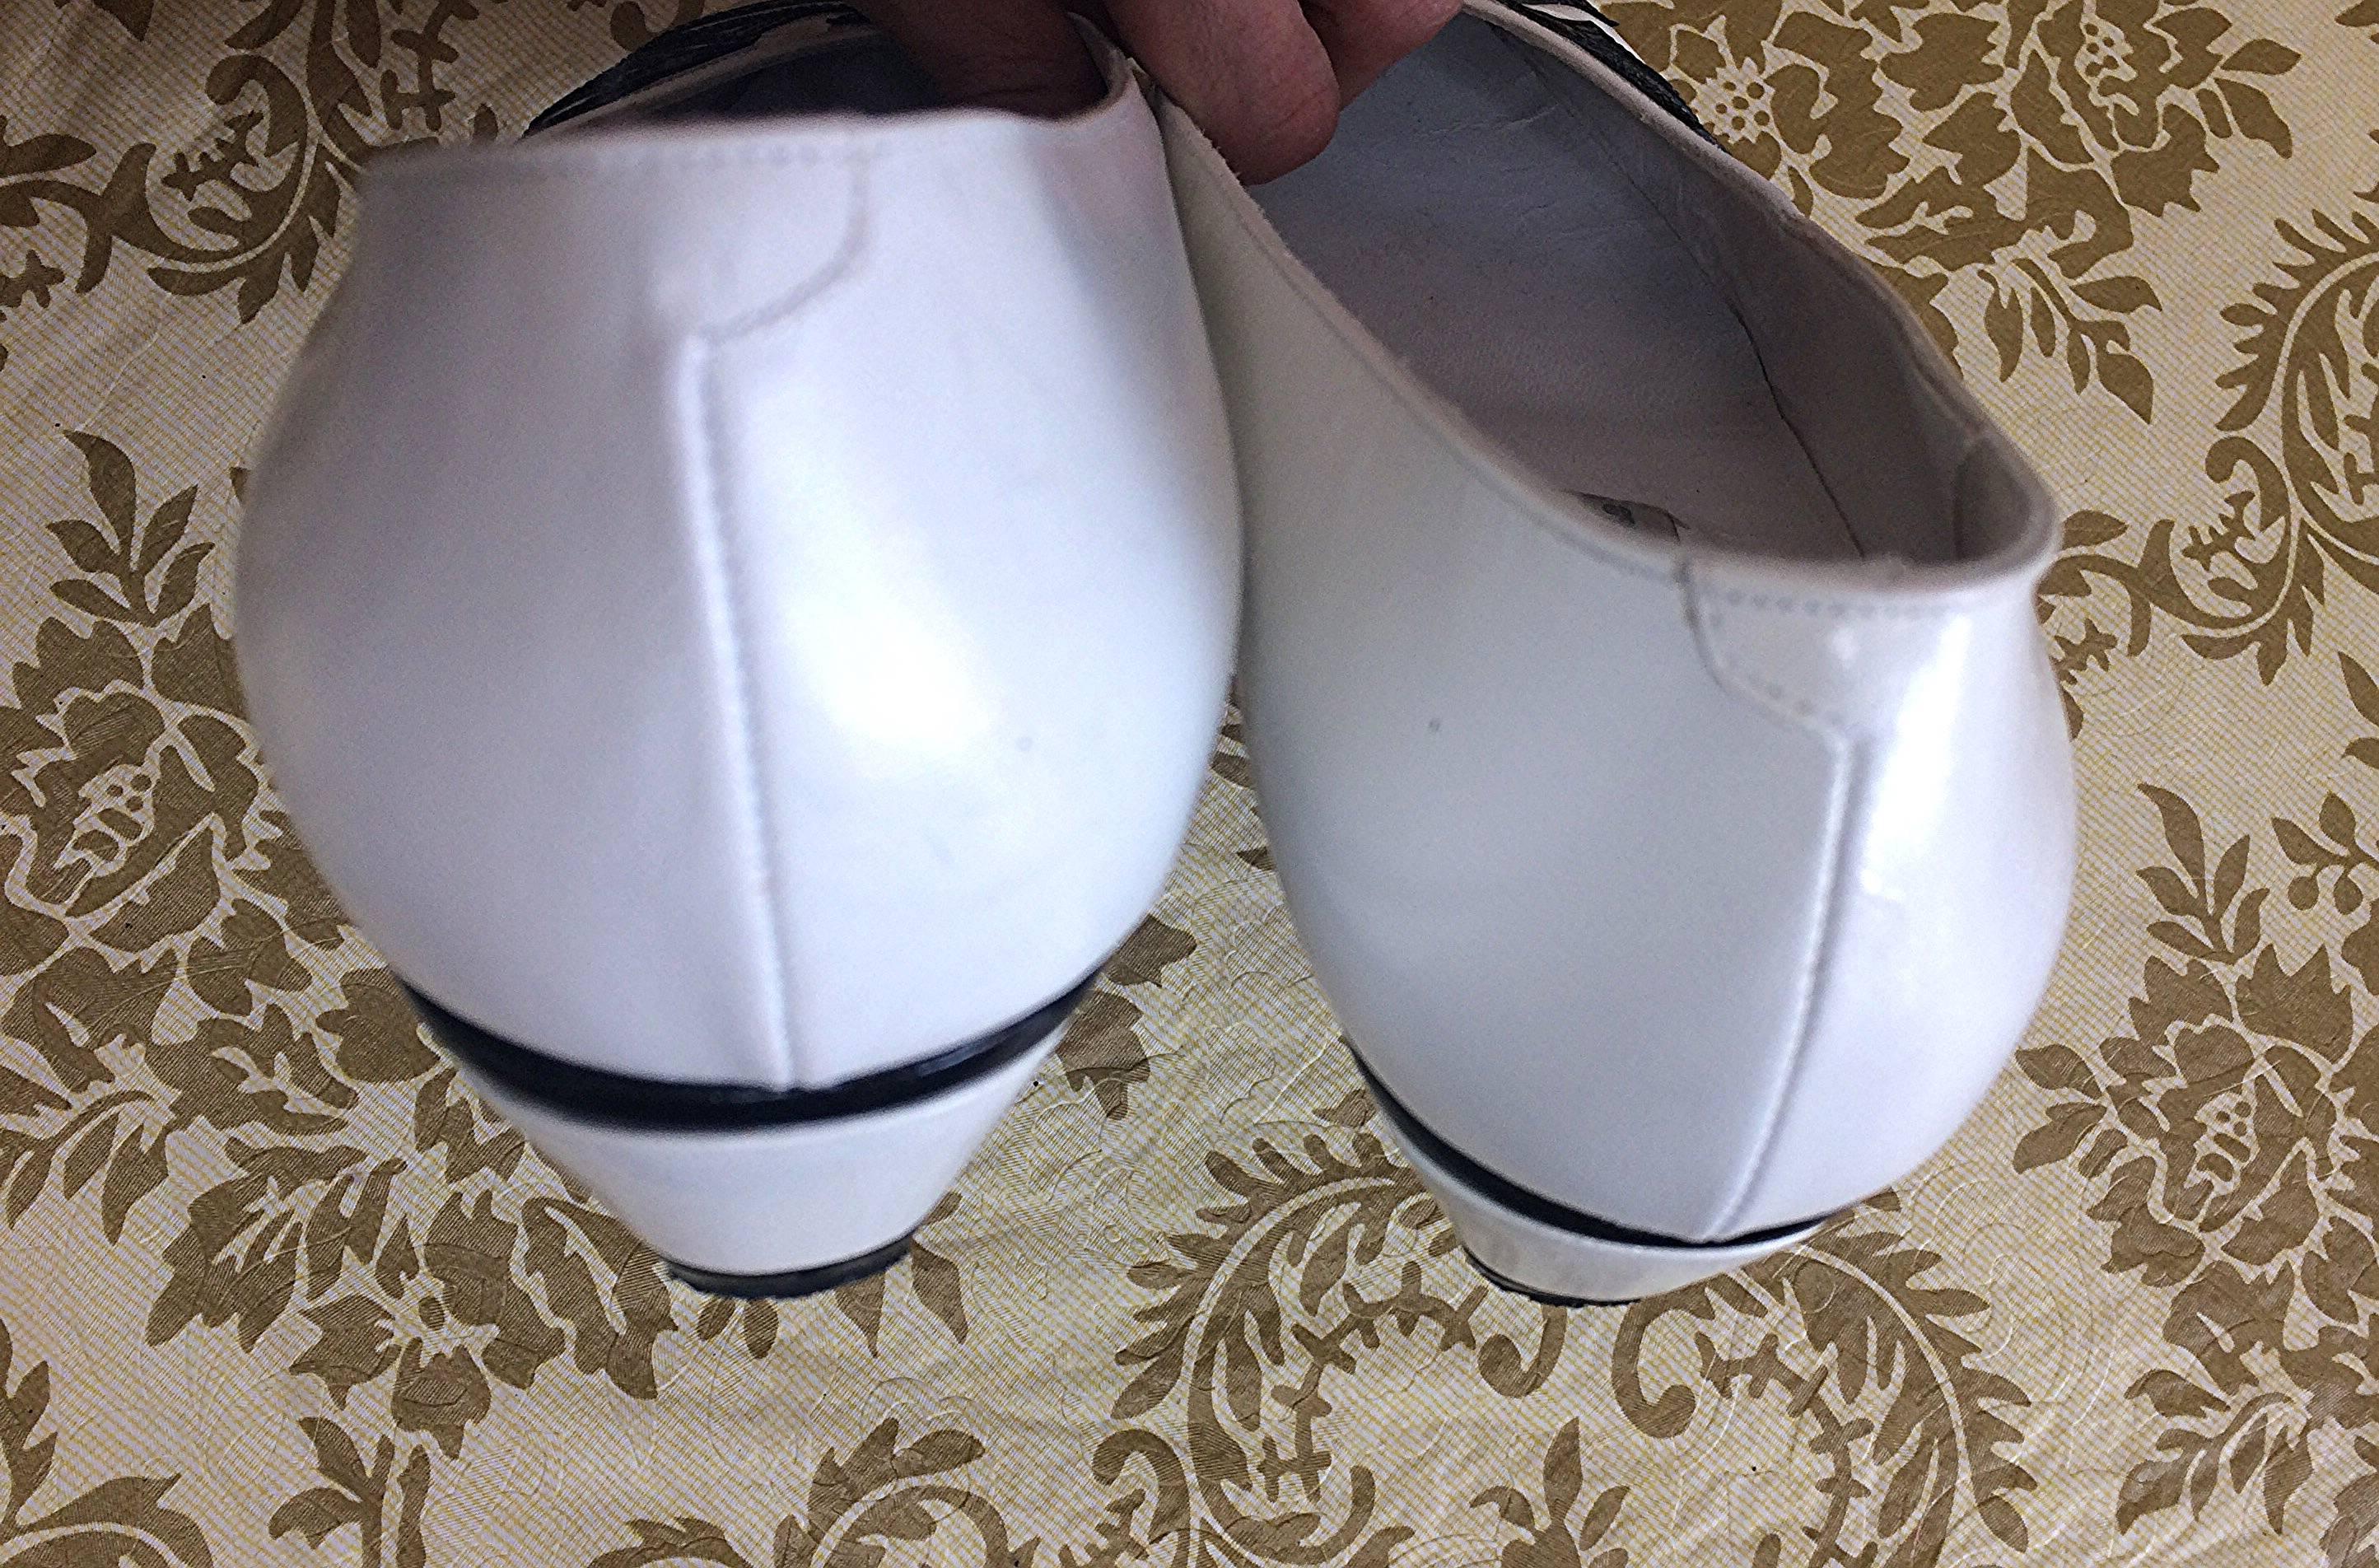 Vintage BALLY white and black leather flat shoes, pumps with geometric design. 1